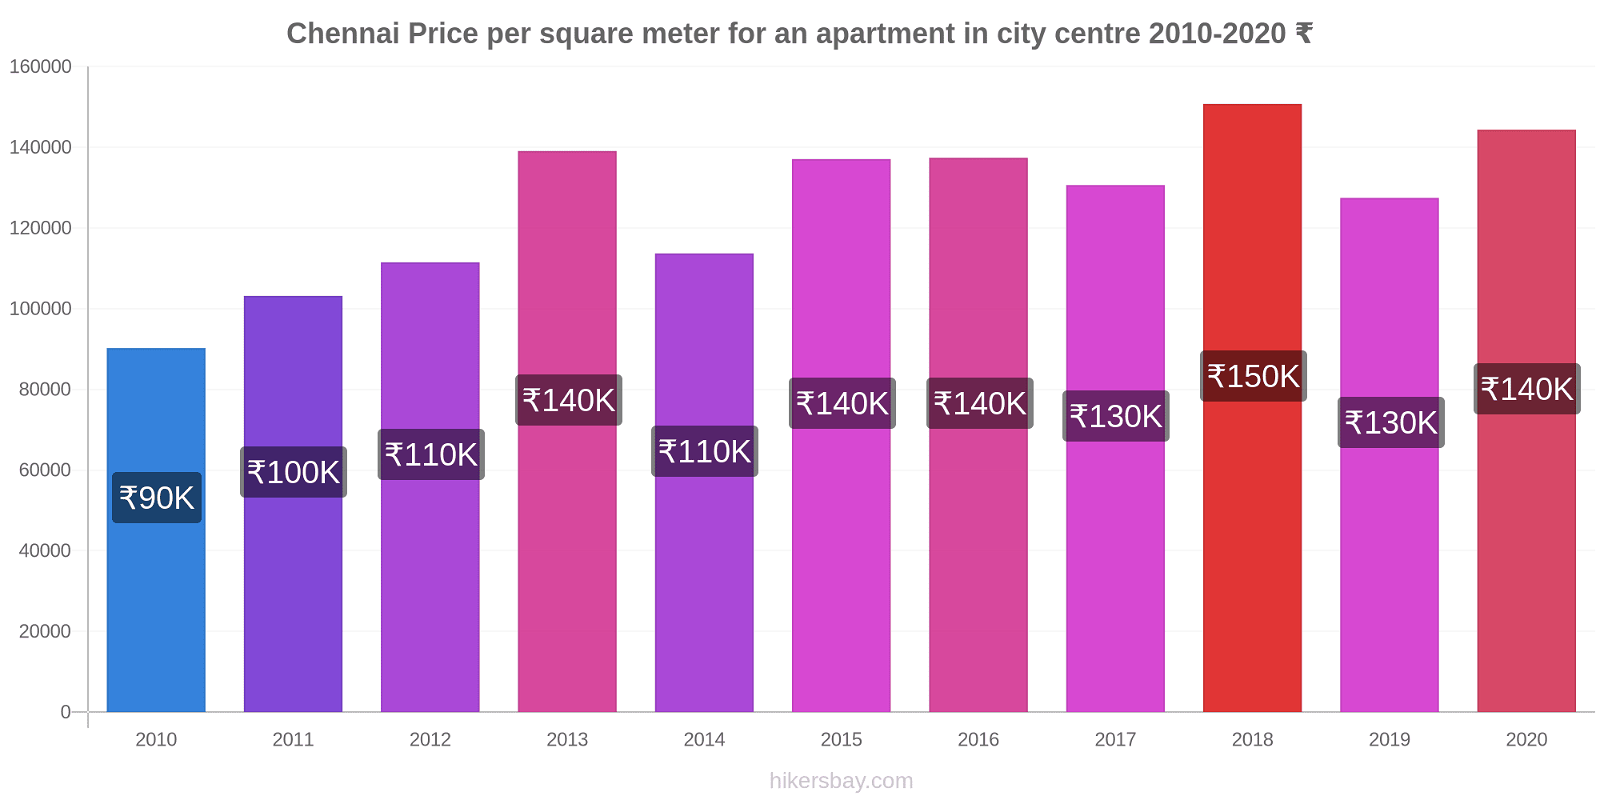 Chennai price changes Price per square meter for an apartment in city centre hikersbay.com